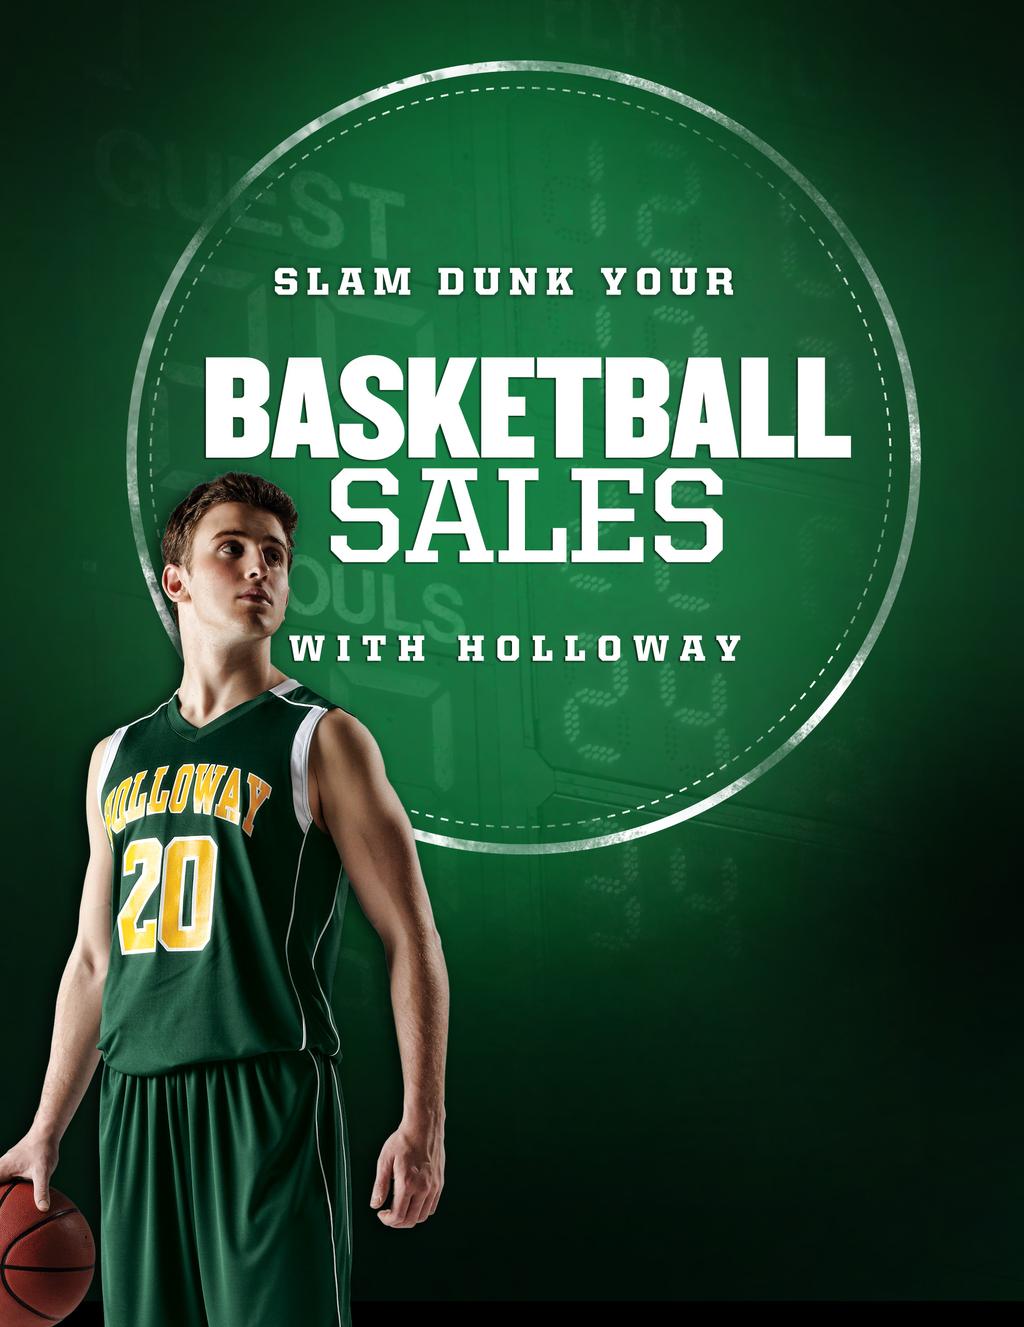 HOLLOWAY / GAMEPLAN WINTER / 2012 With football season in full swing, Basketball is just around the corner.